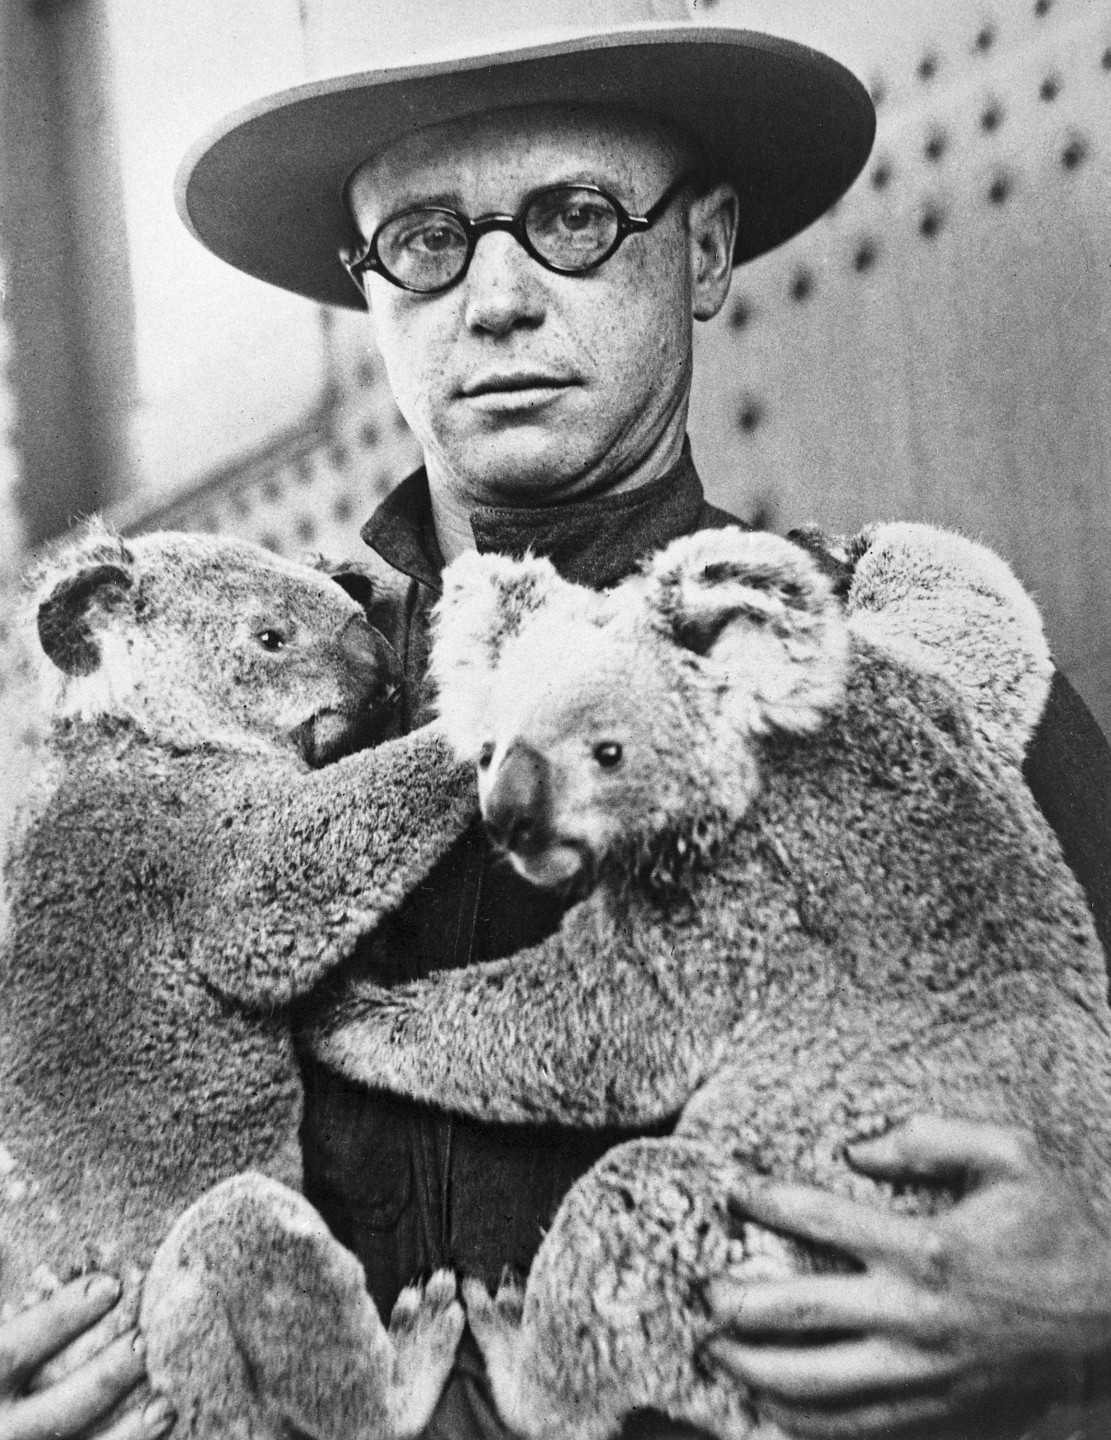 Curator of mammals Richard Addison holds the Zoo's first two koalas, Snugglepot and Cuddlepie.